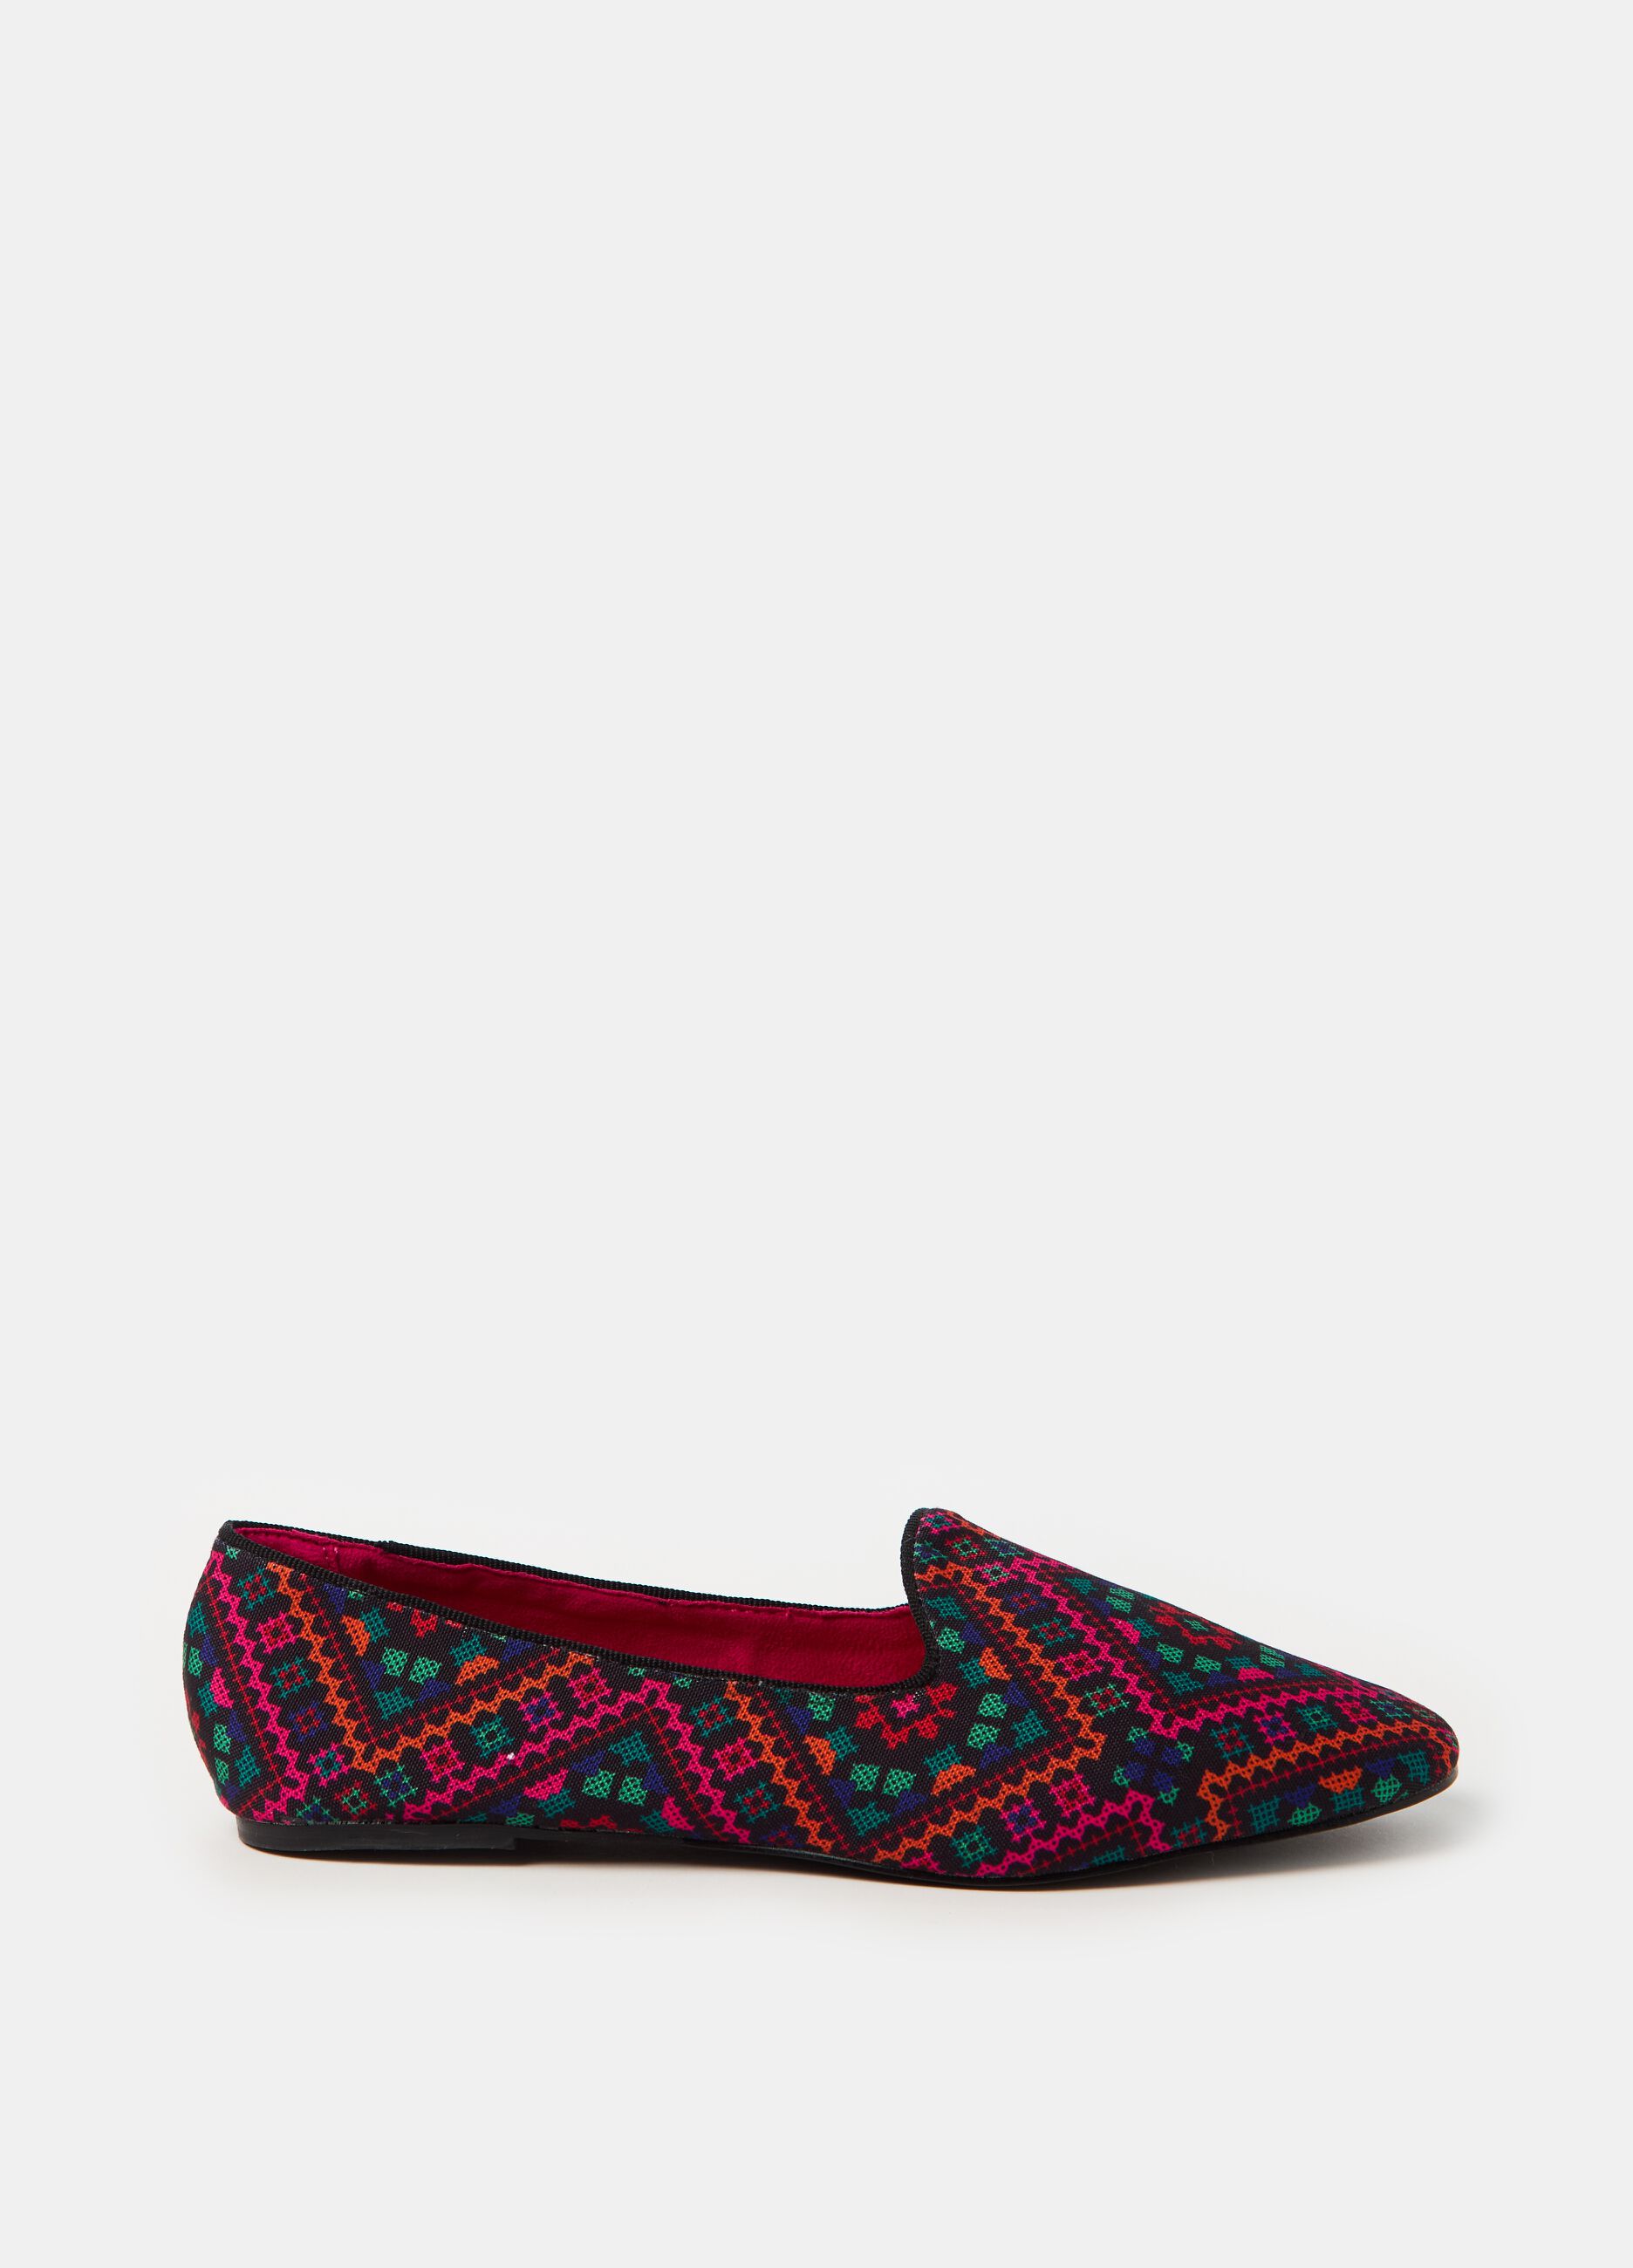 Slipper shoes with geometric pattern